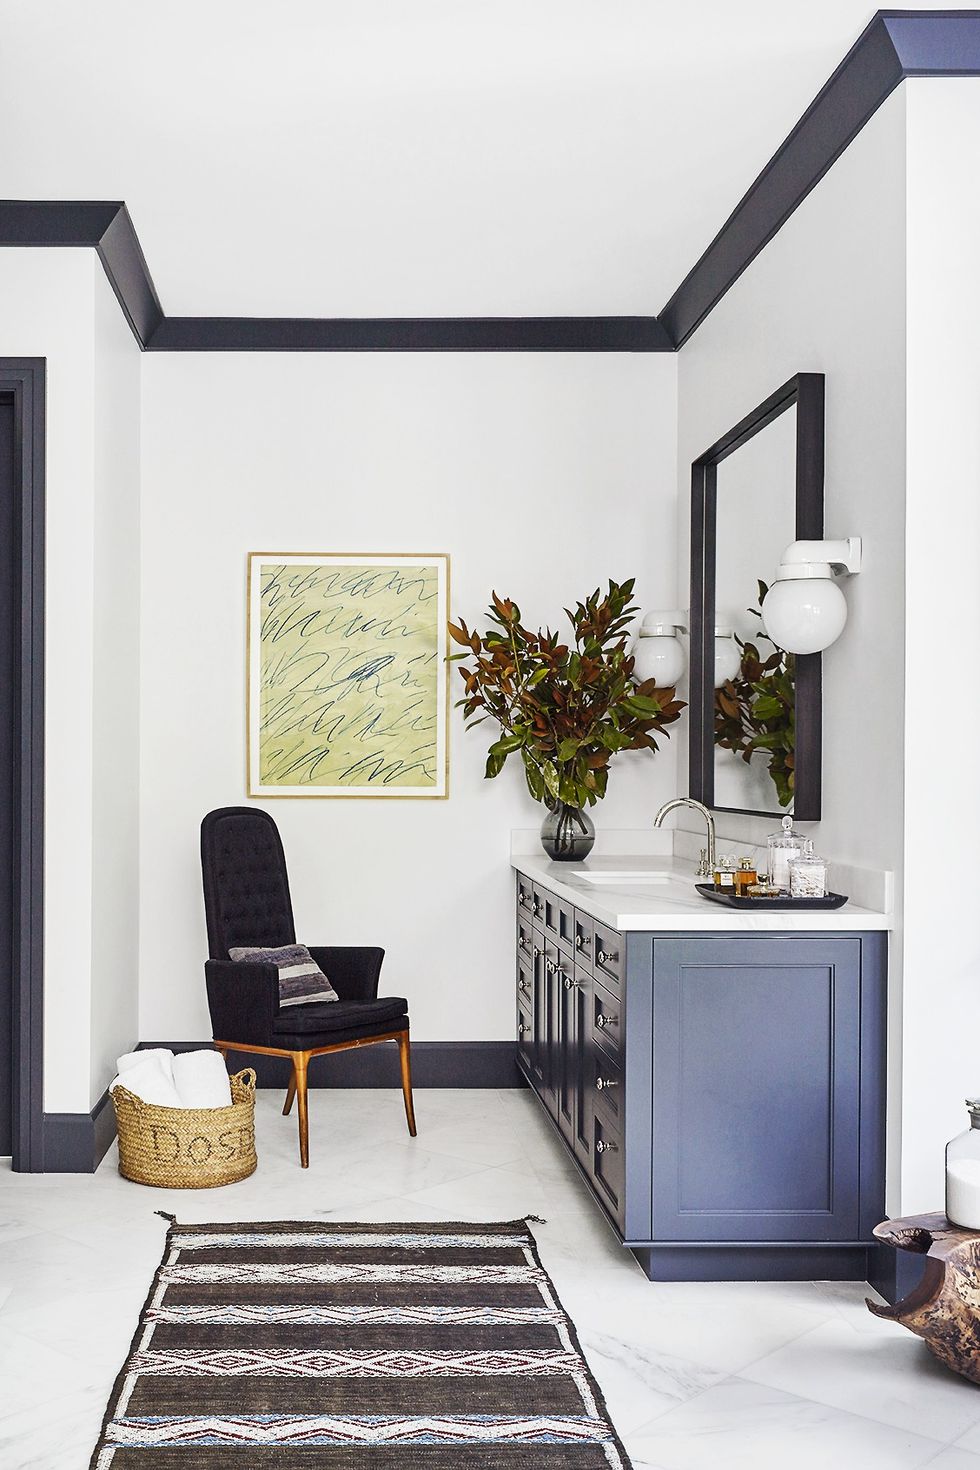 8 White House Black Trim Ideas That Are Lovely And Never Go Out Of Style! :  r/TrendingInterior